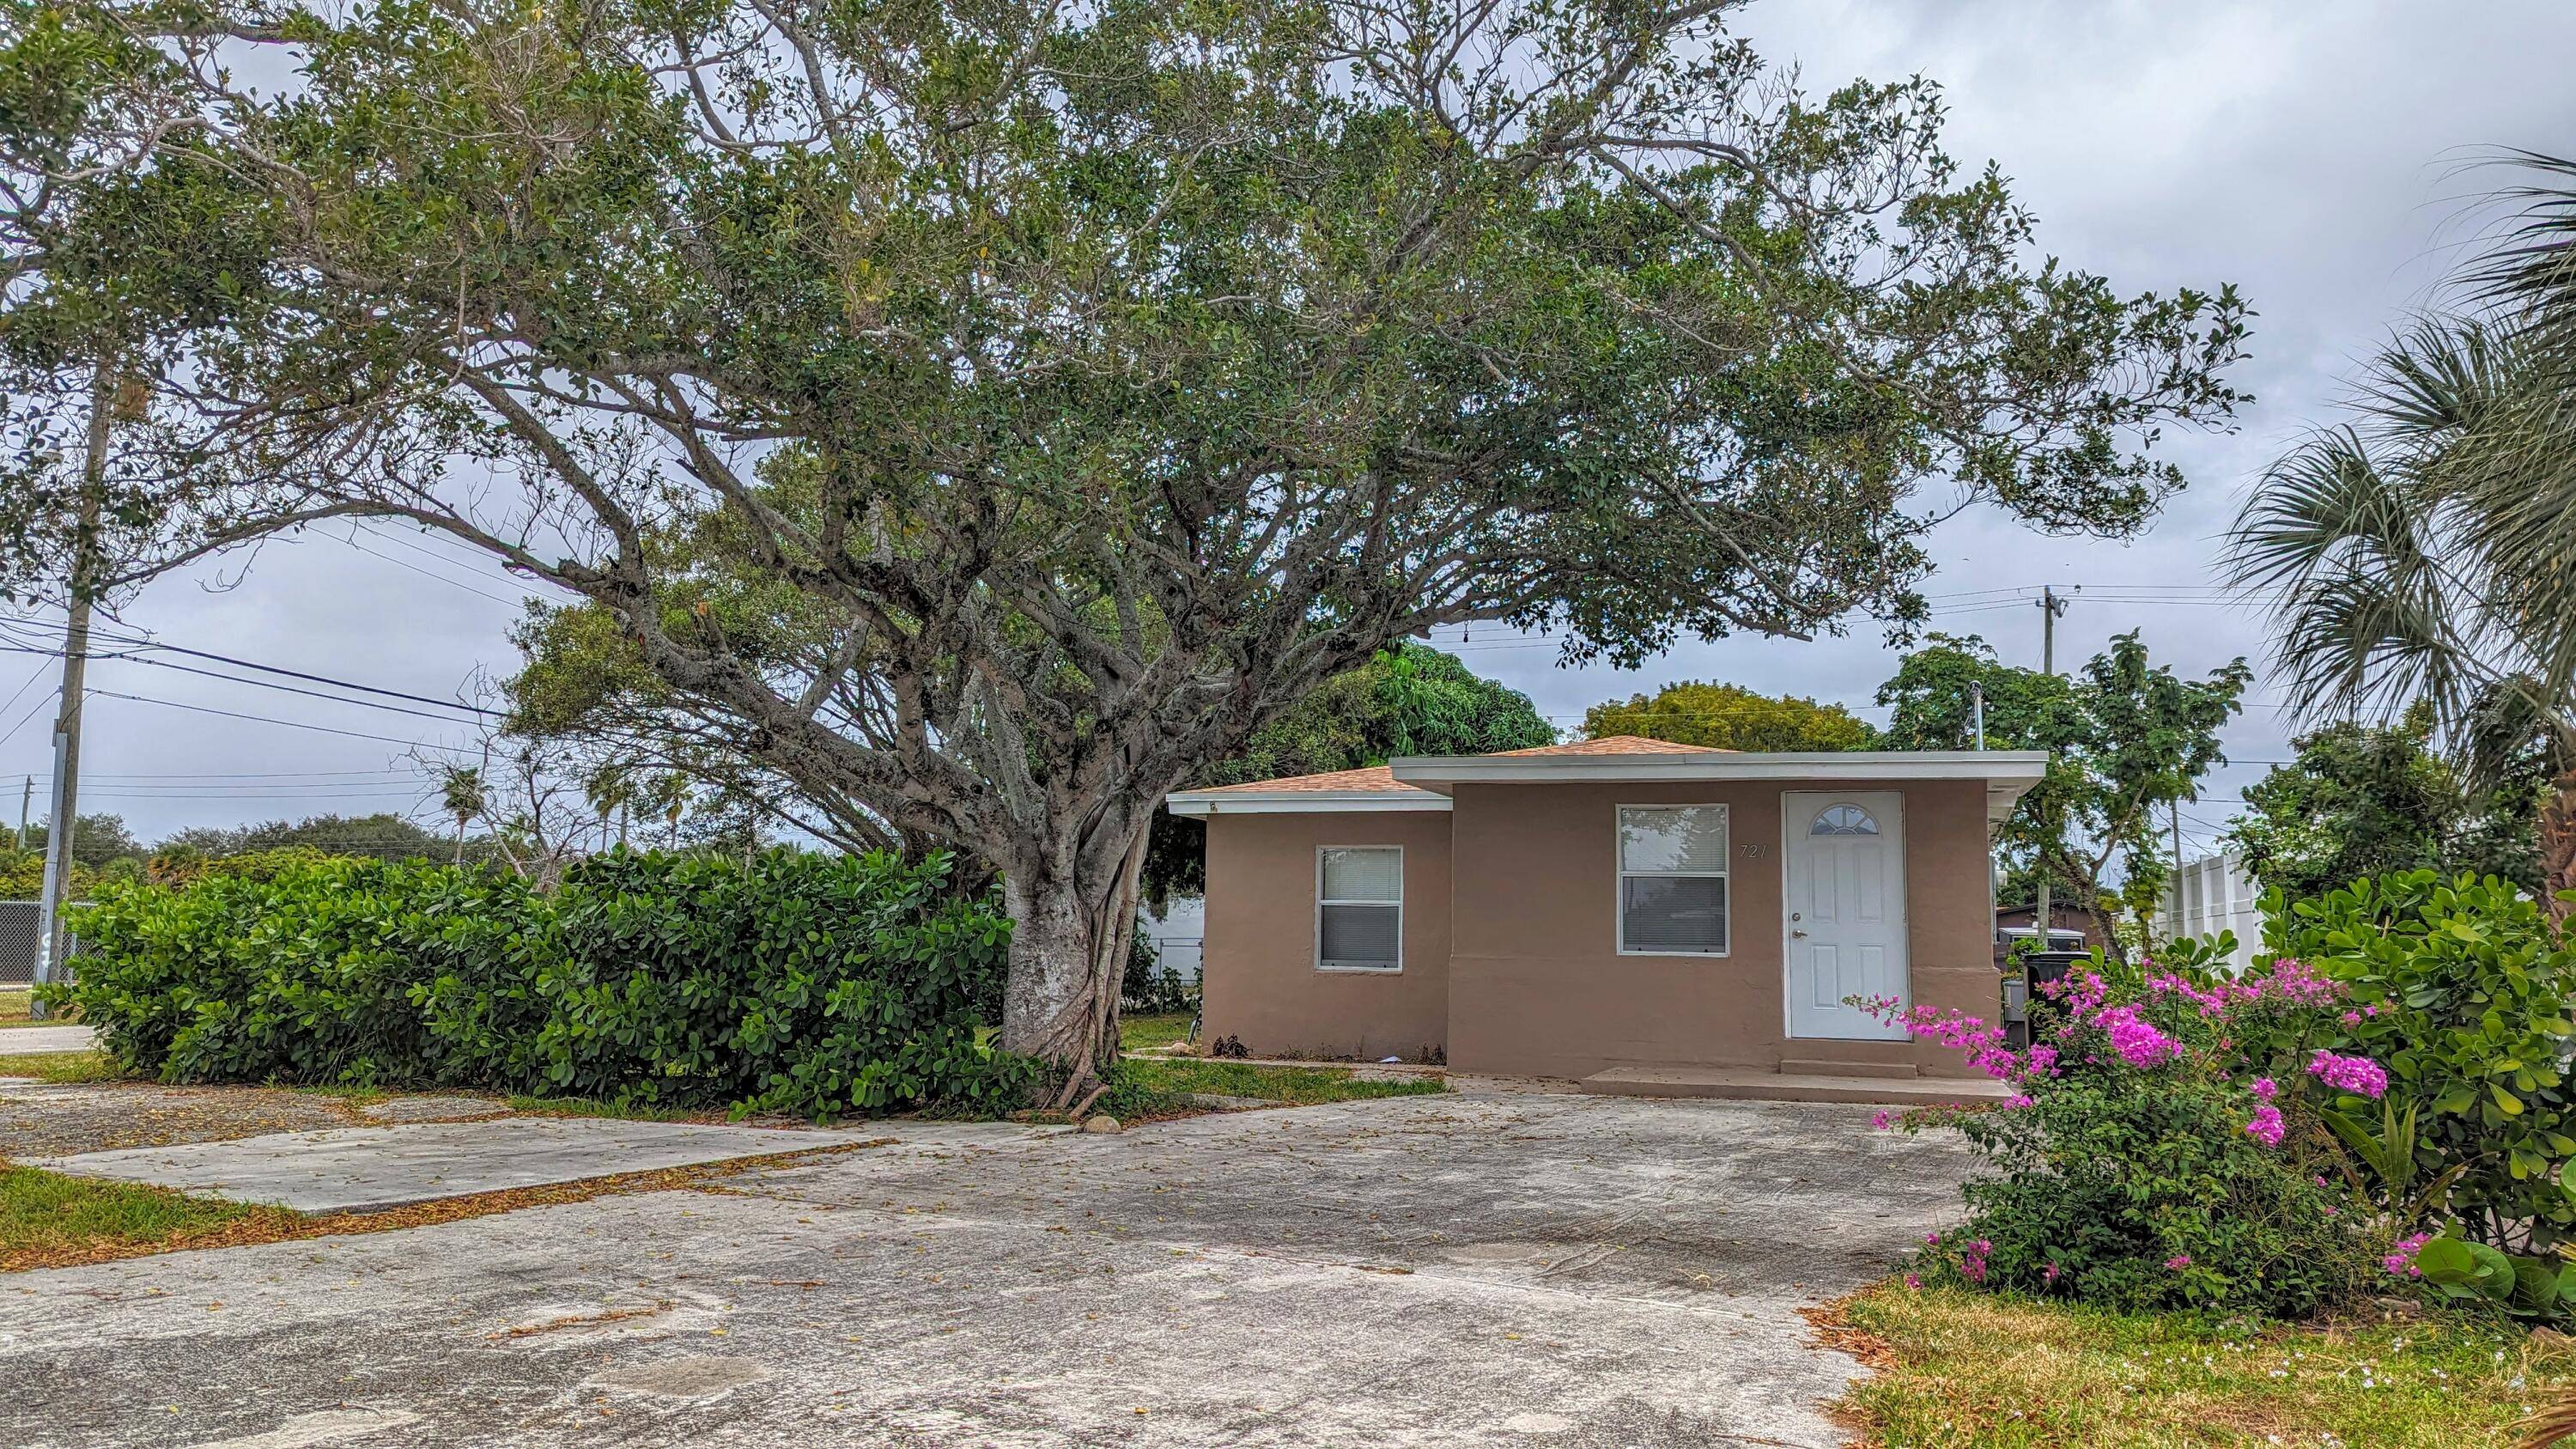 Delray Beach the place to be, SFH Single Family Home No HOA, No Condo, No Town home this is your own space close to Downtown Delray Beach the beaches and ...